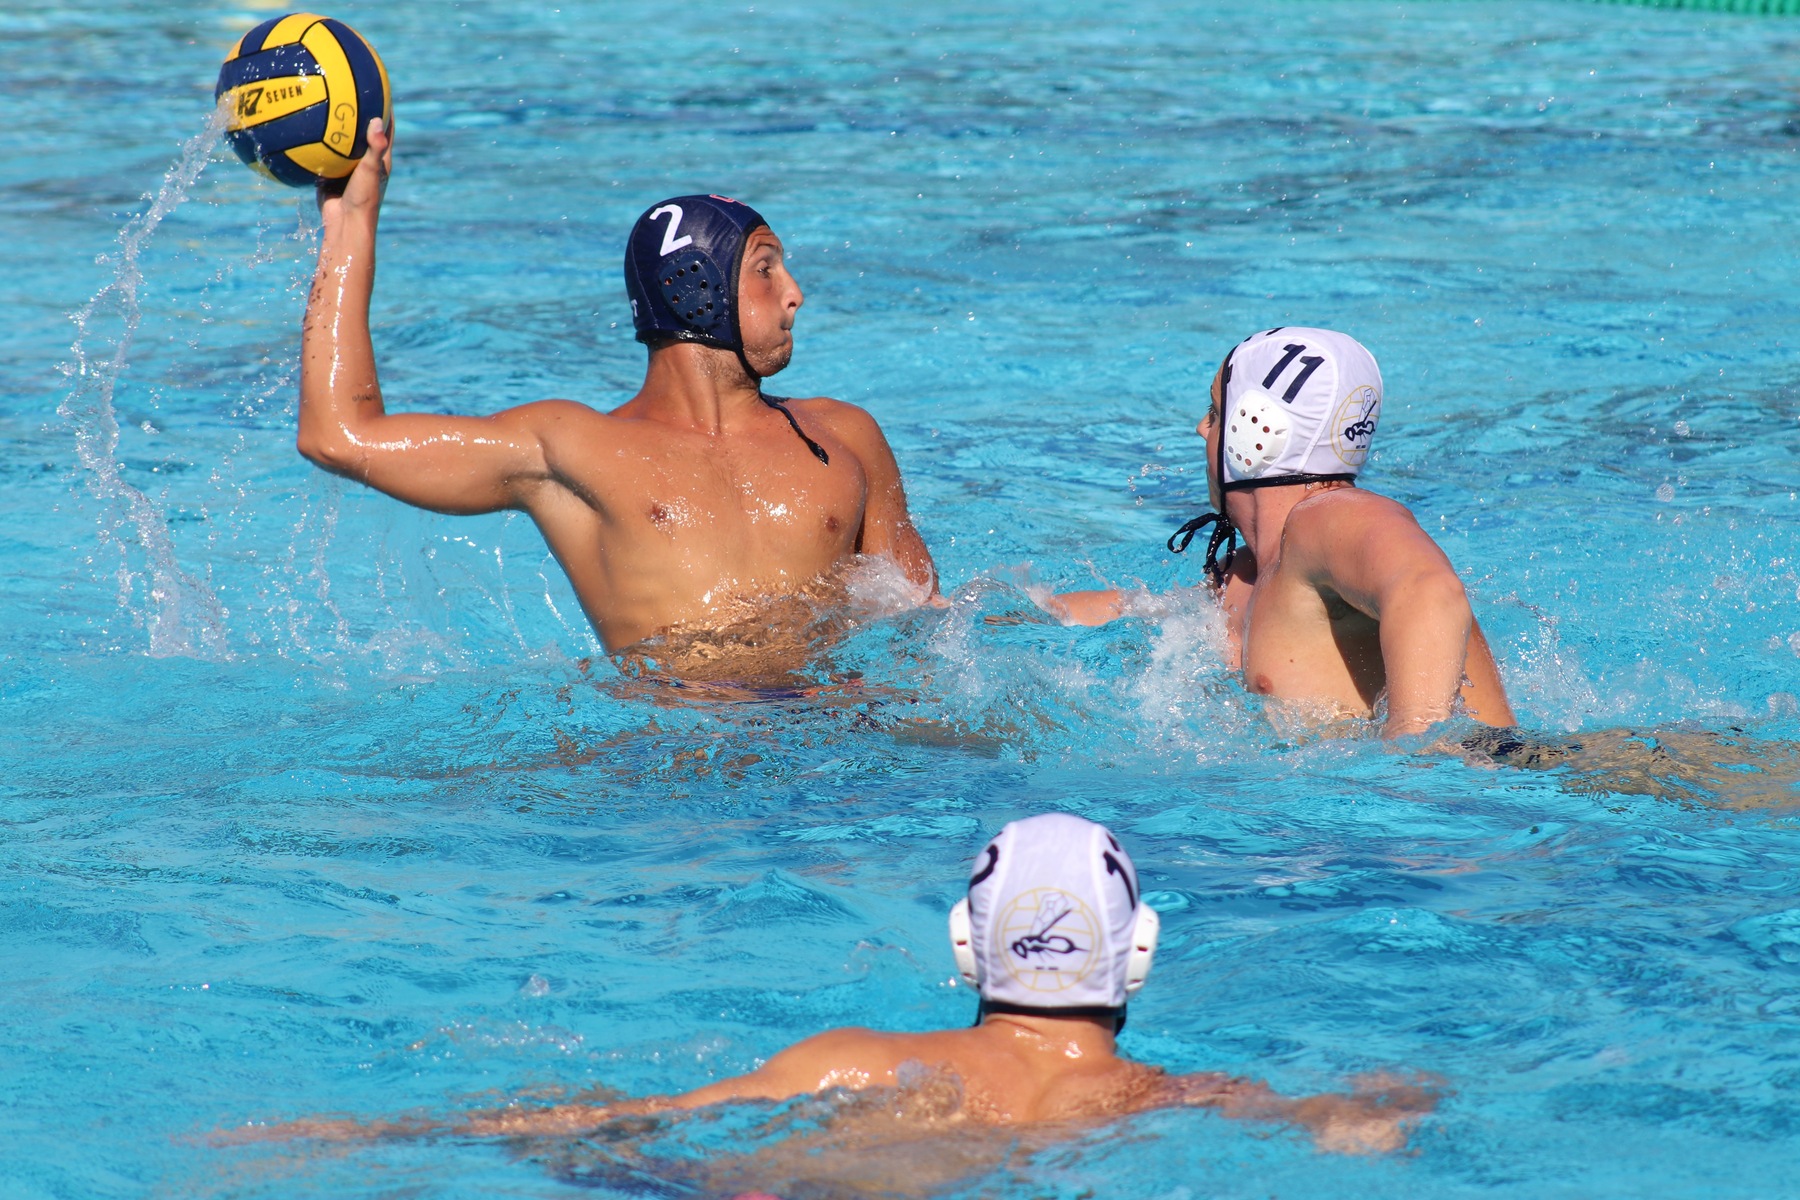 Strong second half propels Pirates to 11-8 win over Fullerton